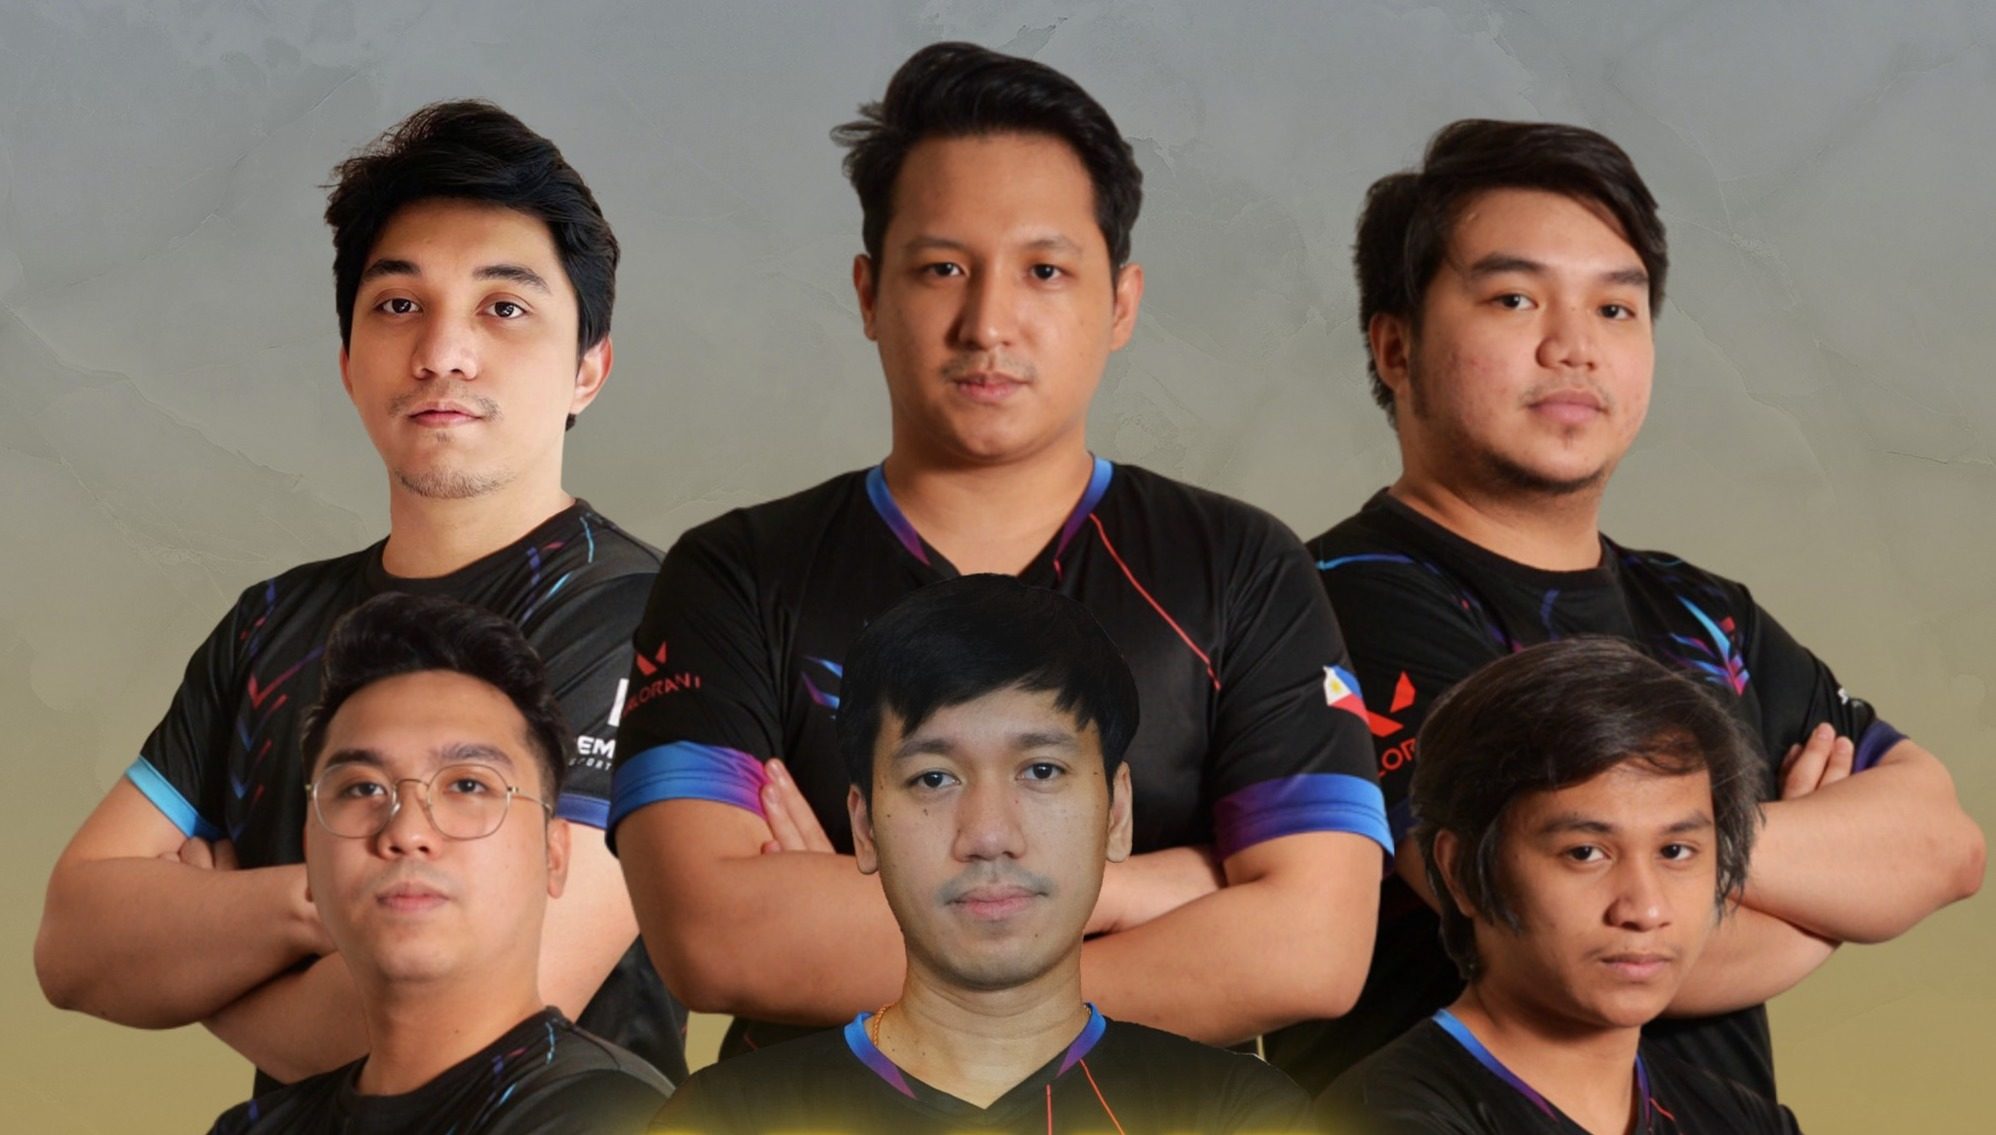 A Pro Team in the Philippines is offering boosting services. Should this be  against Valorant's rules? : r/ValorantCompetitive